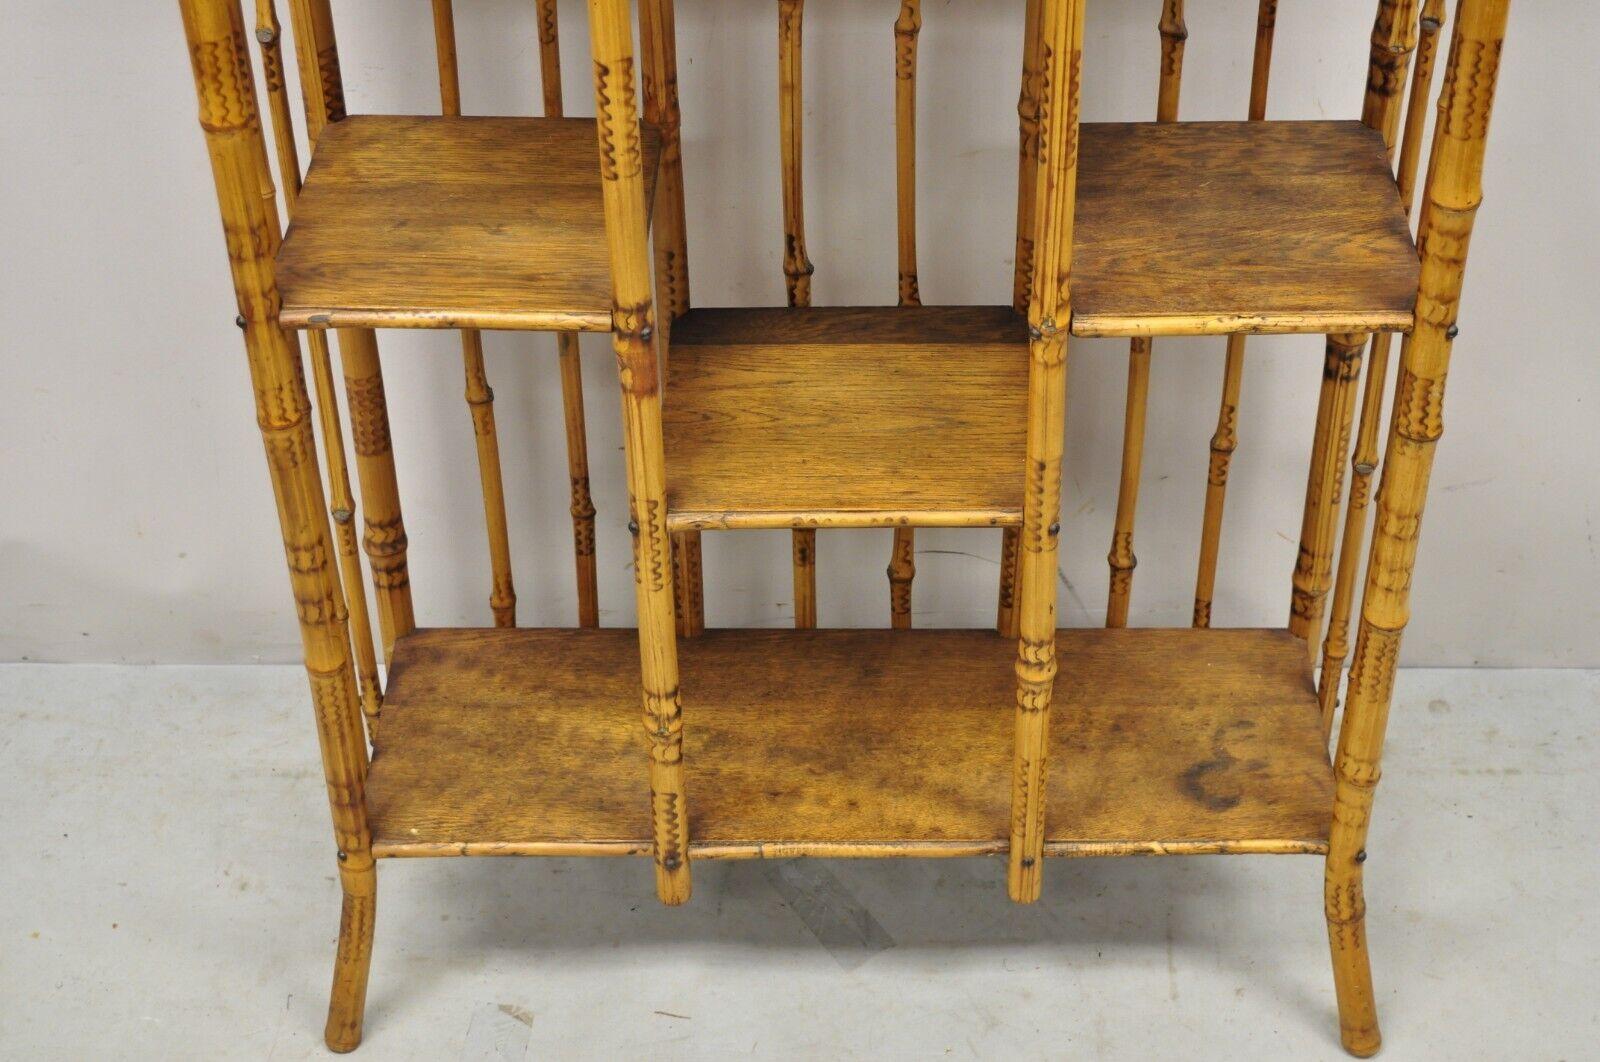 19th C English Victorian Bamboo Stick and Ball Curio Shelf Etagere w/ Mirror For Sale 4